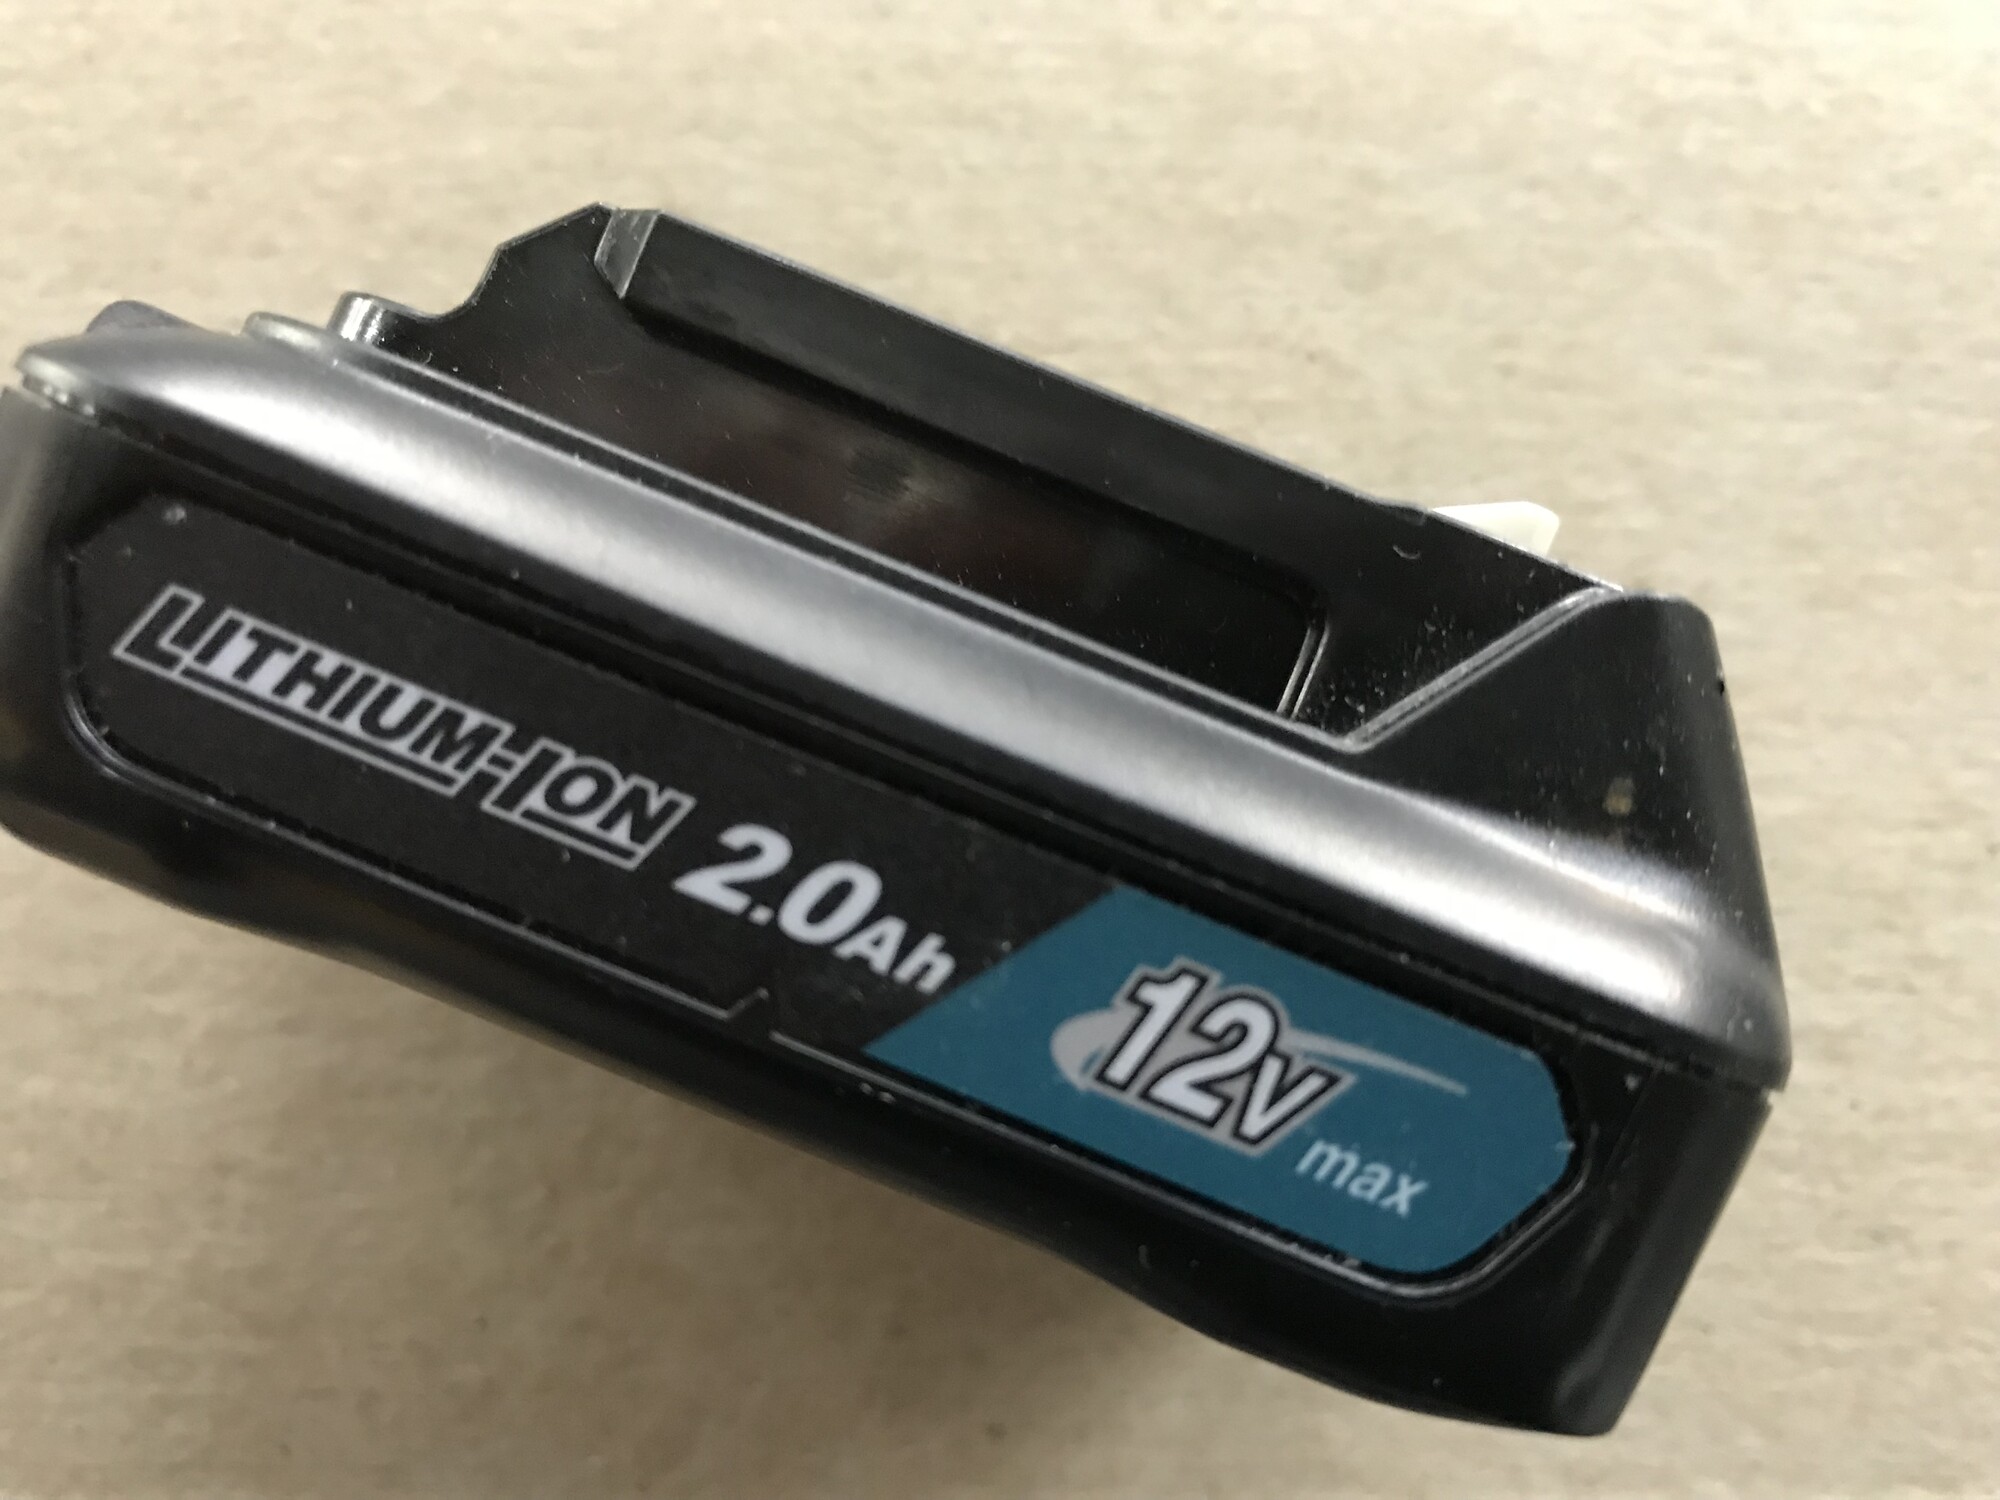 Li Ion Battery, Makita, 12v Li Ion BL1021B

The 12-Volt MAX CXT Lithium-Ion 2.0 Ah battery combines efficient performance with the superior balance and ergonomics of a slide-style battery and the convenience of an on-board LED battery charge level indicator. The 12-Volt MAX CXT 2.0 Ah battery (and 4.0 Ah battery, sold separately) is at the heart of the expanding Makita 12-Volt MAX CXT tool series, combining performance with superior ergonomics in a compact size. Makita 12-Volt MAX CXT Lithium-Ion batteries can be charged on the efficient Makita 12-Volt MAX CXT Lithium-Ion charger (DC10WD).
Lithium-ion battery delivers longer run time and lower self-discharges
Features an integrated LED battery charge level indicator
Compact design for less weight
Part of the expanding 12-Volt MAX CXT tool series, combining performance with superior ergonomics in a compact size
Use only with Makita charger DC10WD